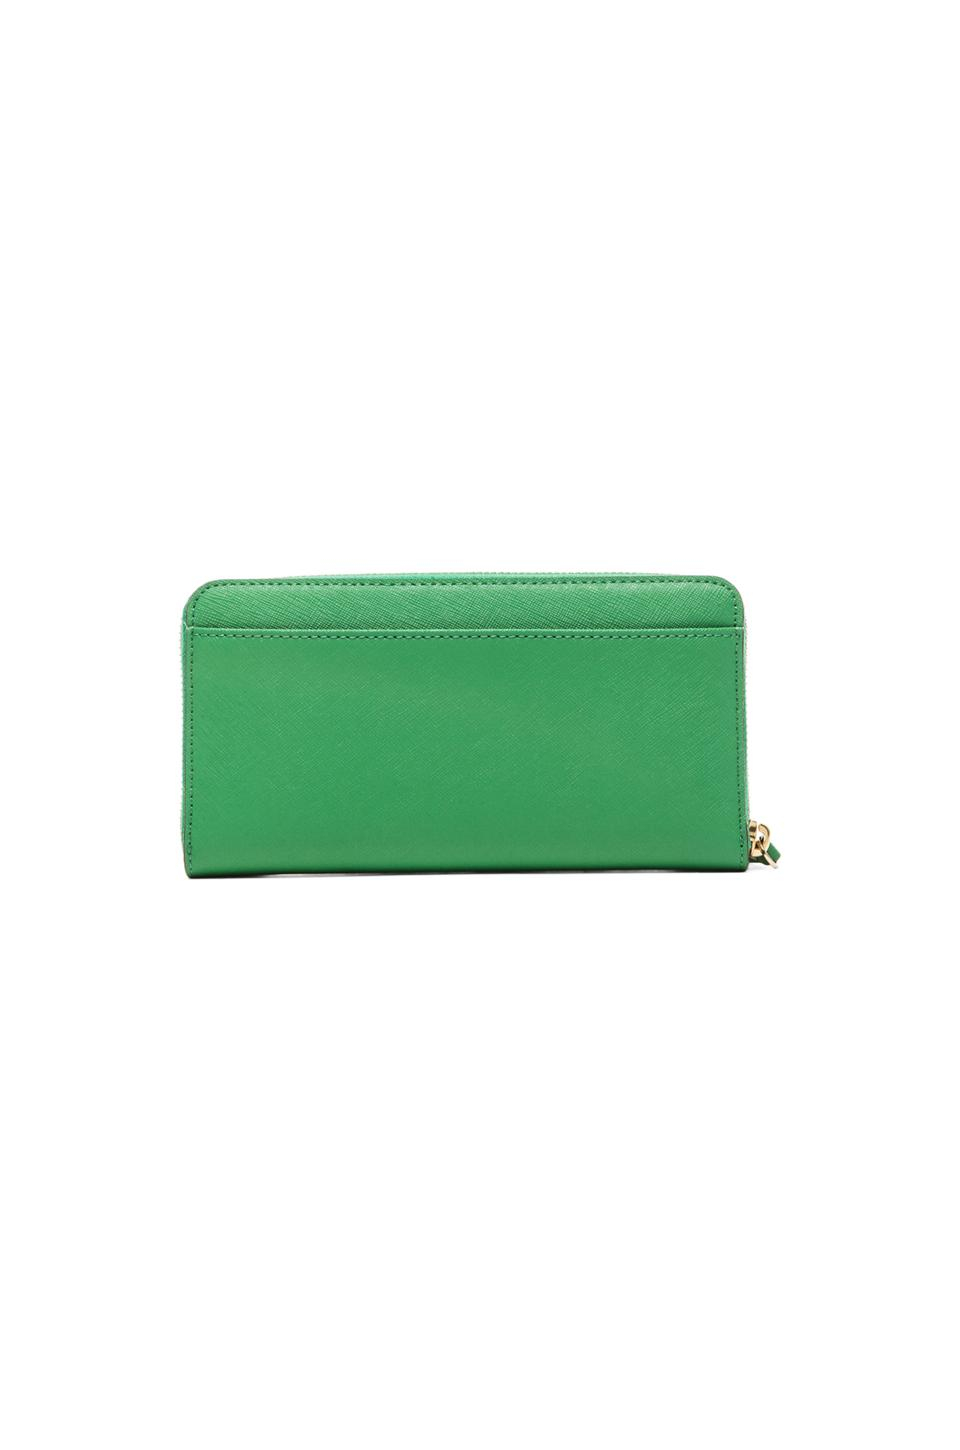 Lyst - Kate Spade New York Lacey Wallet in Green